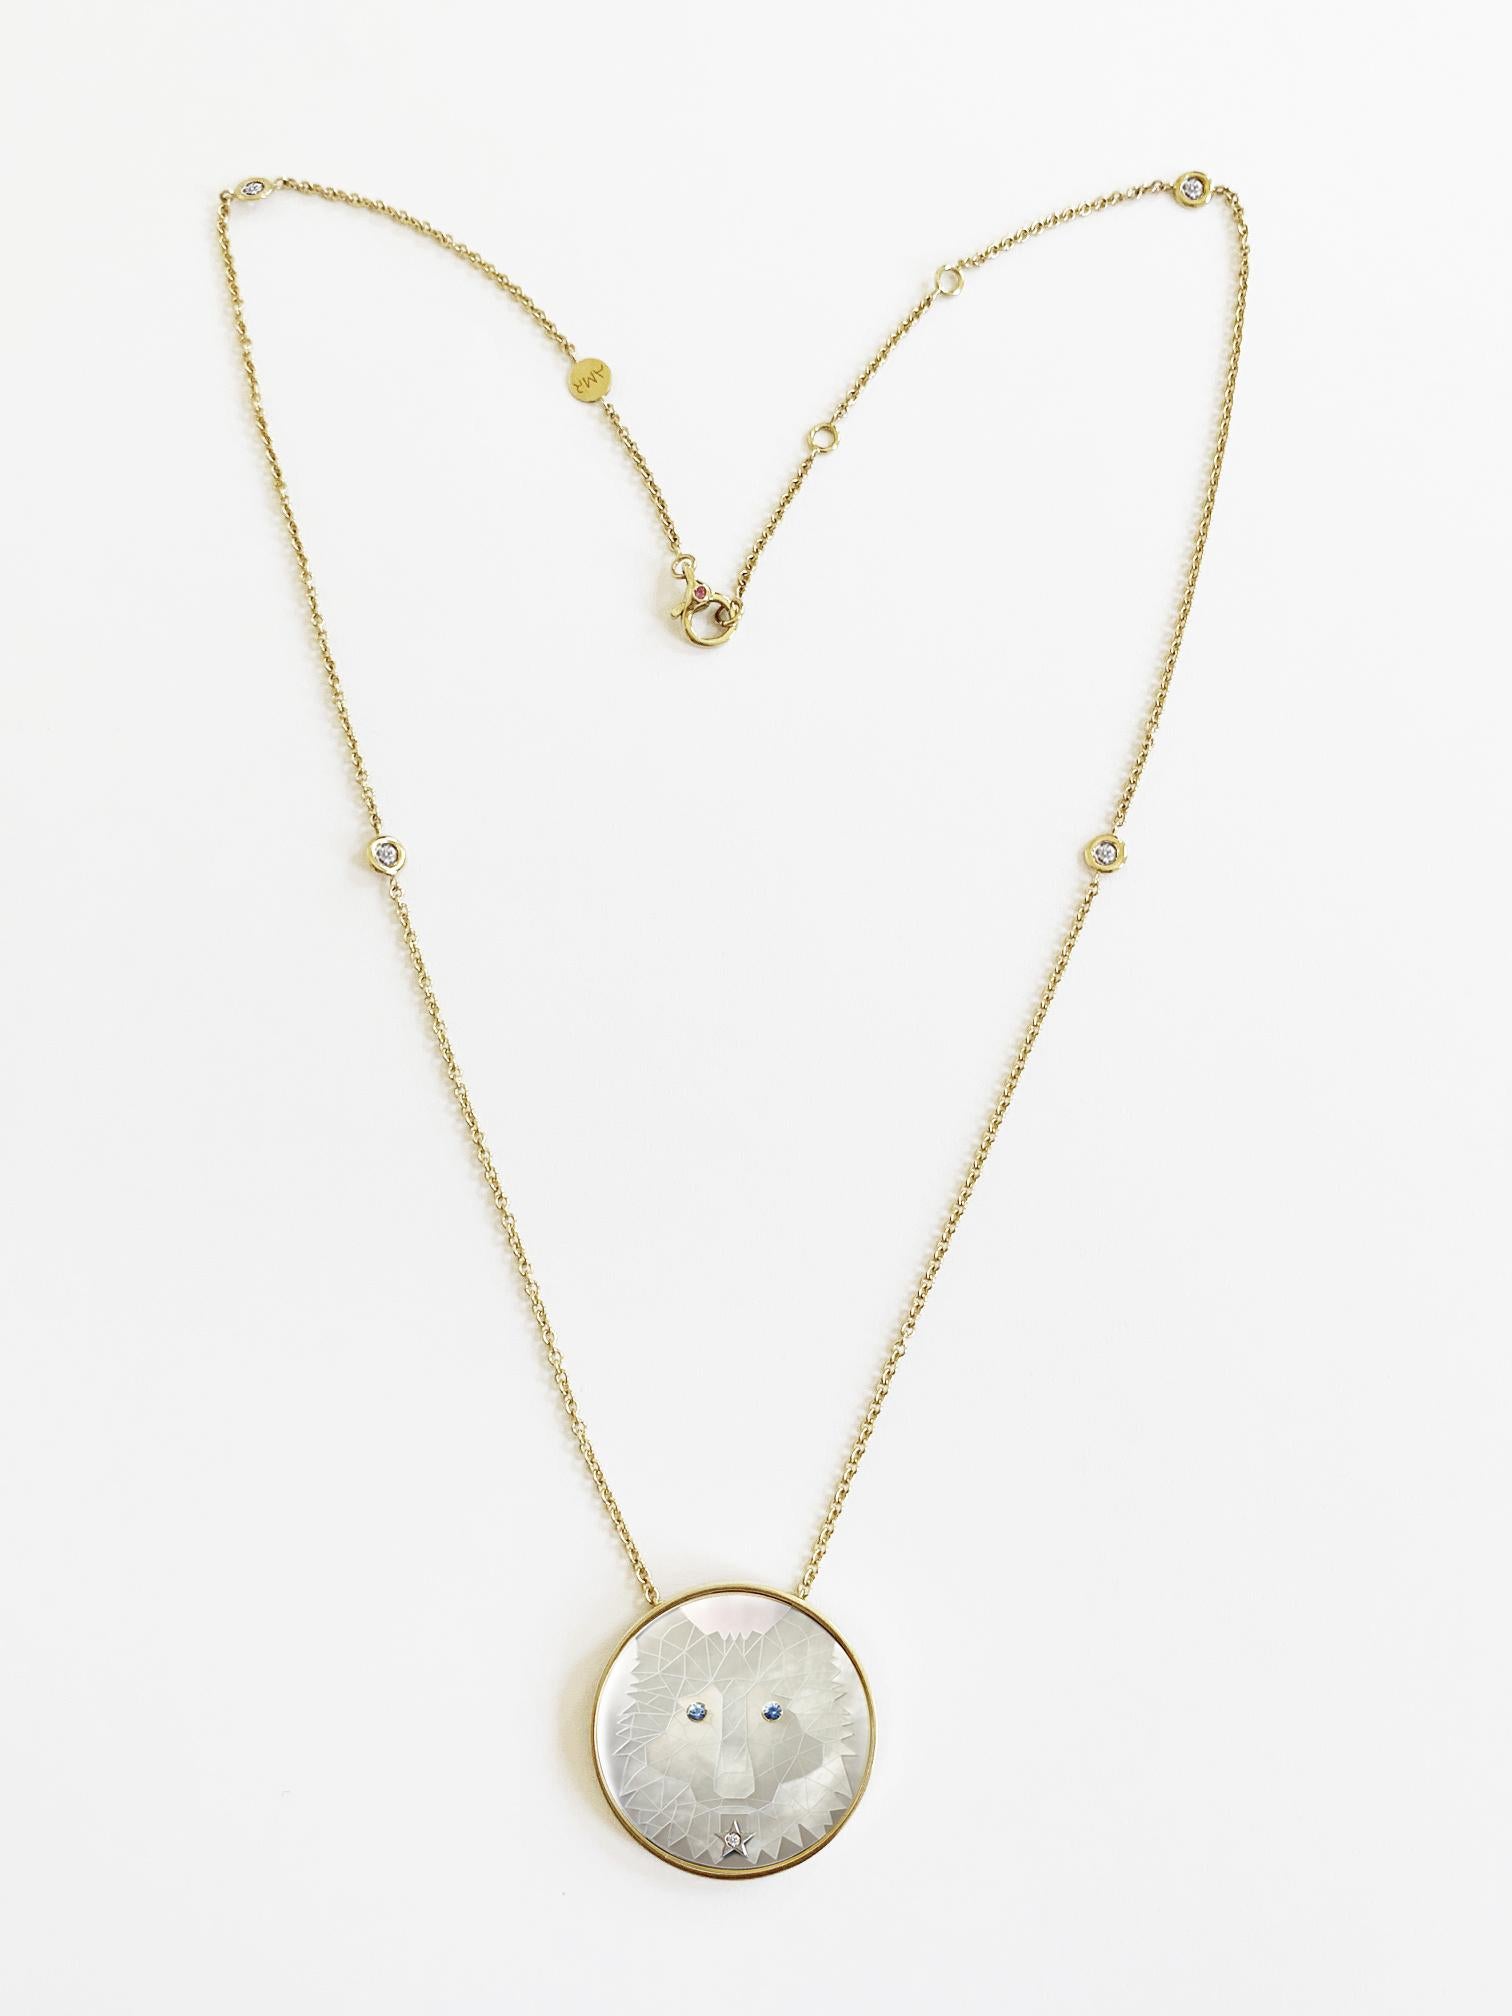 Art Wild Collection:  Lady Wolf Pendant.
Yellow Gold Pendant and chain ( it measure 40mm with diamonds)
This necklace features a unique engraved, carved and engraved white mother of pearl with natural blue sapphires eyes and a centered white gold